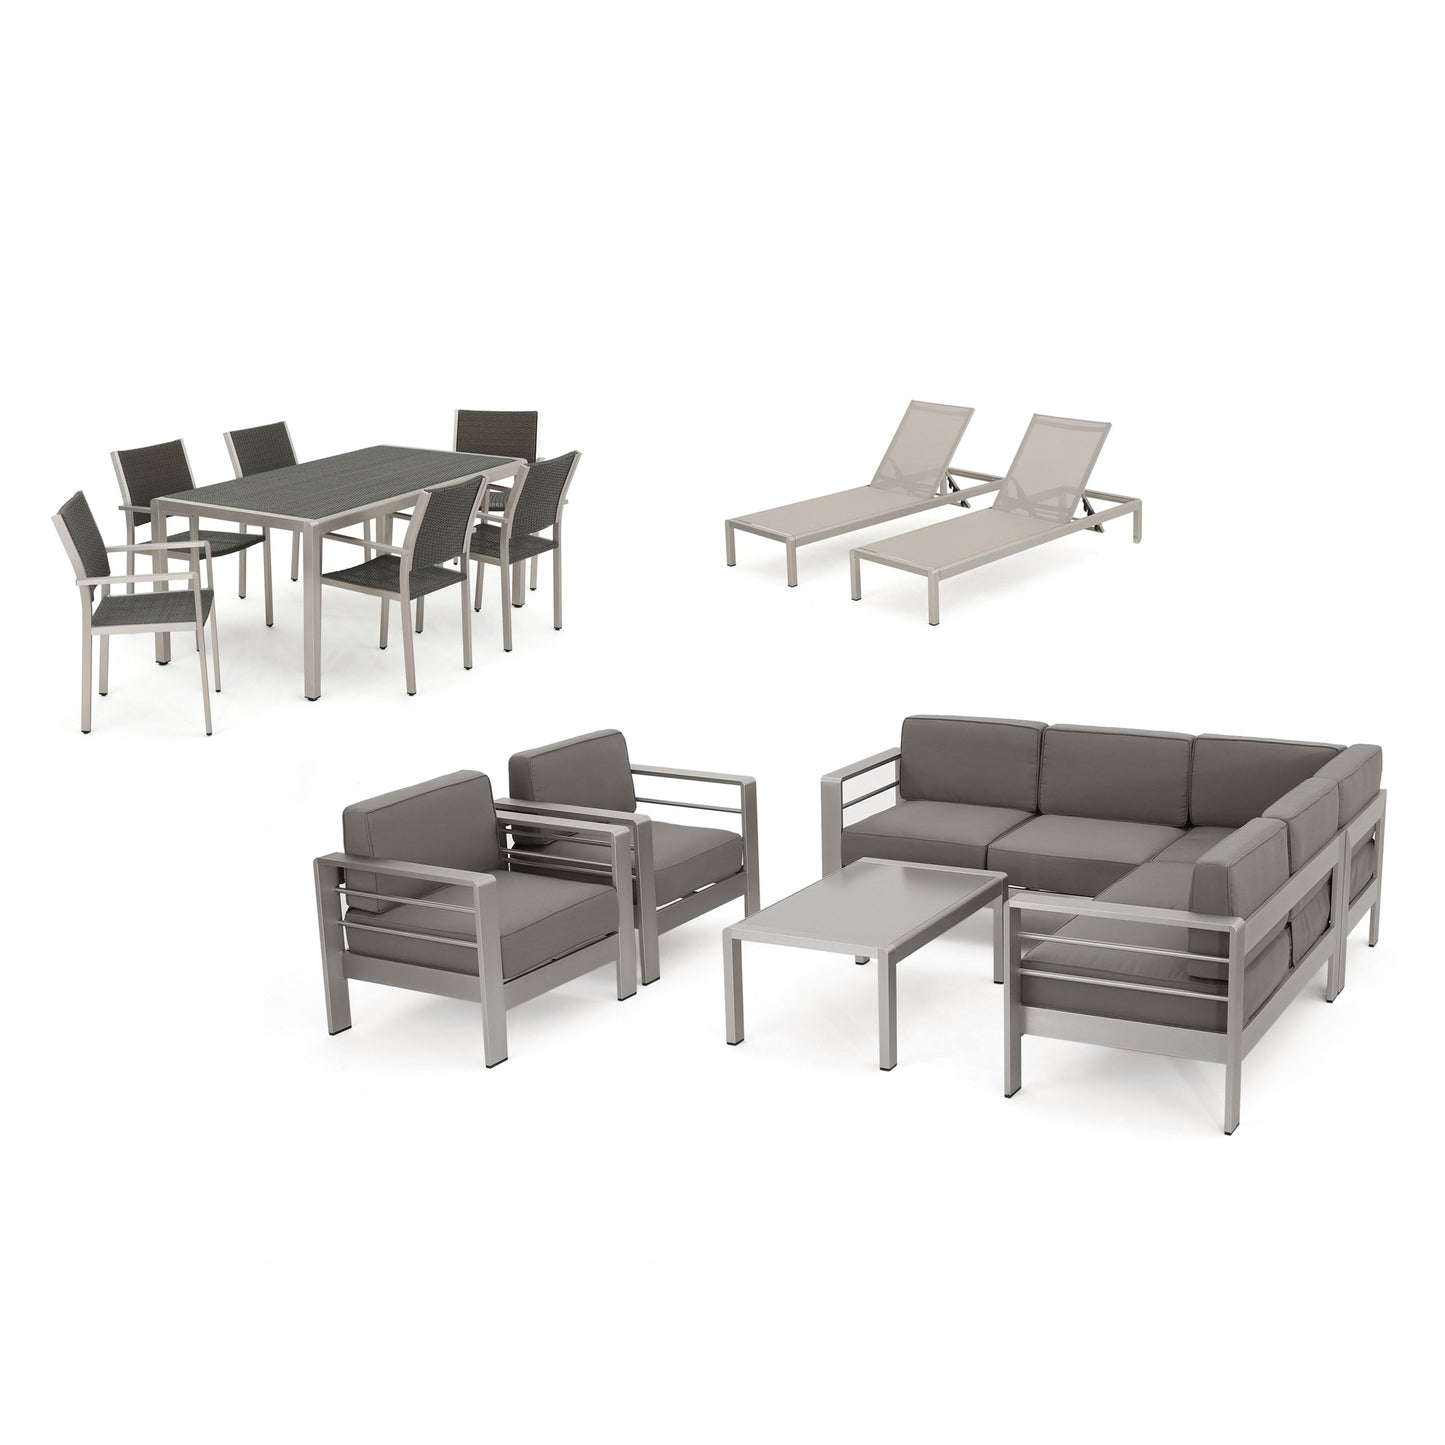 Coral Bay Outdoor Wicker Dining Set w/ Sofa Set, Club Chairs, & Lounges